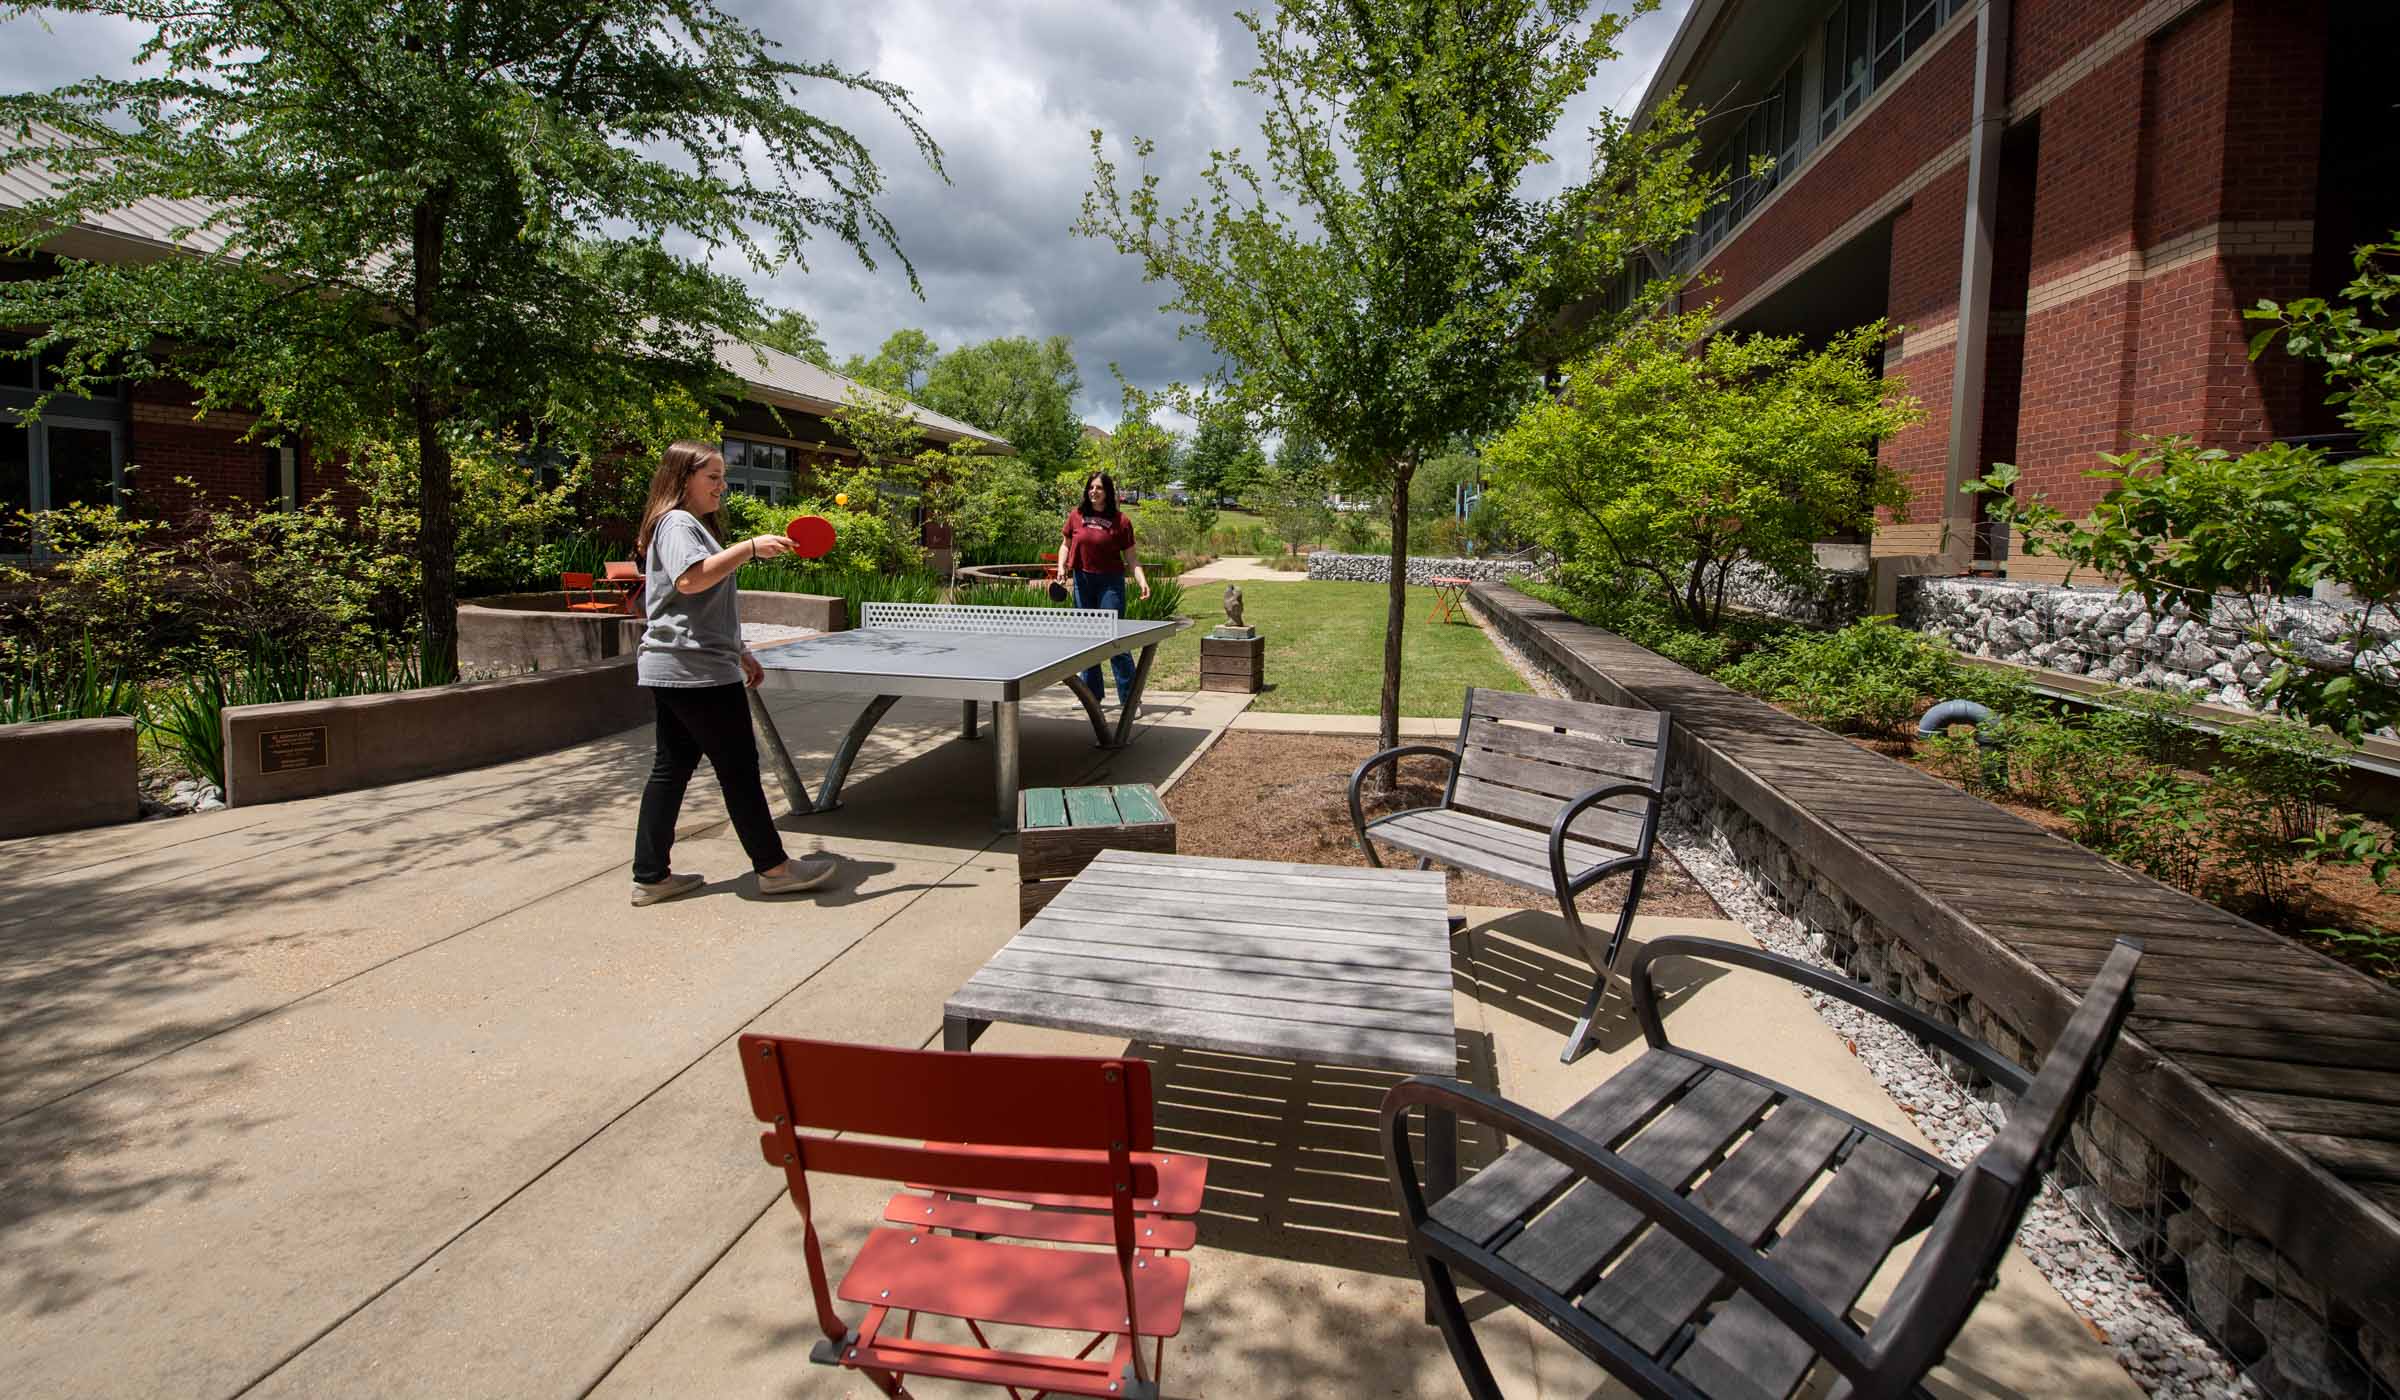 The sunlit Landscape Architecture courtyard featuring chairs and a table in the foreground and two students playing pingpong at center.